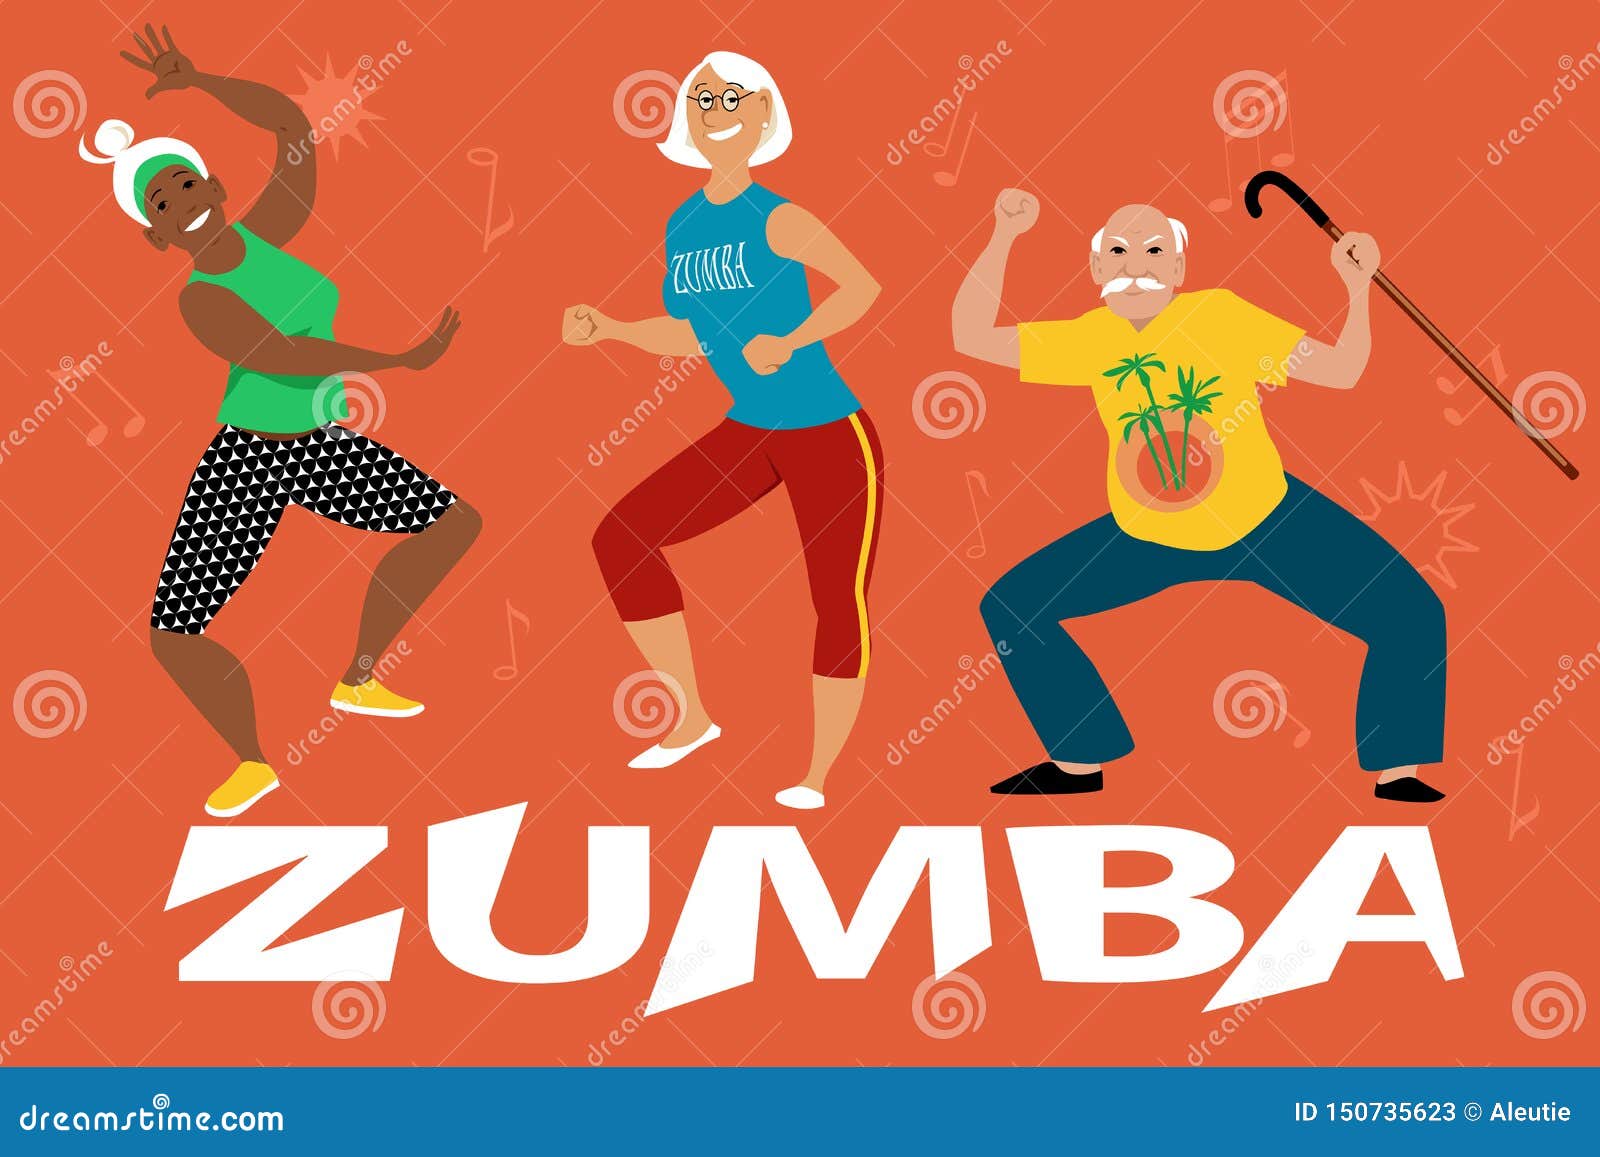 Zumba Cartoons, Illustrations & Vector Stock Images - 672 Pictures to ...